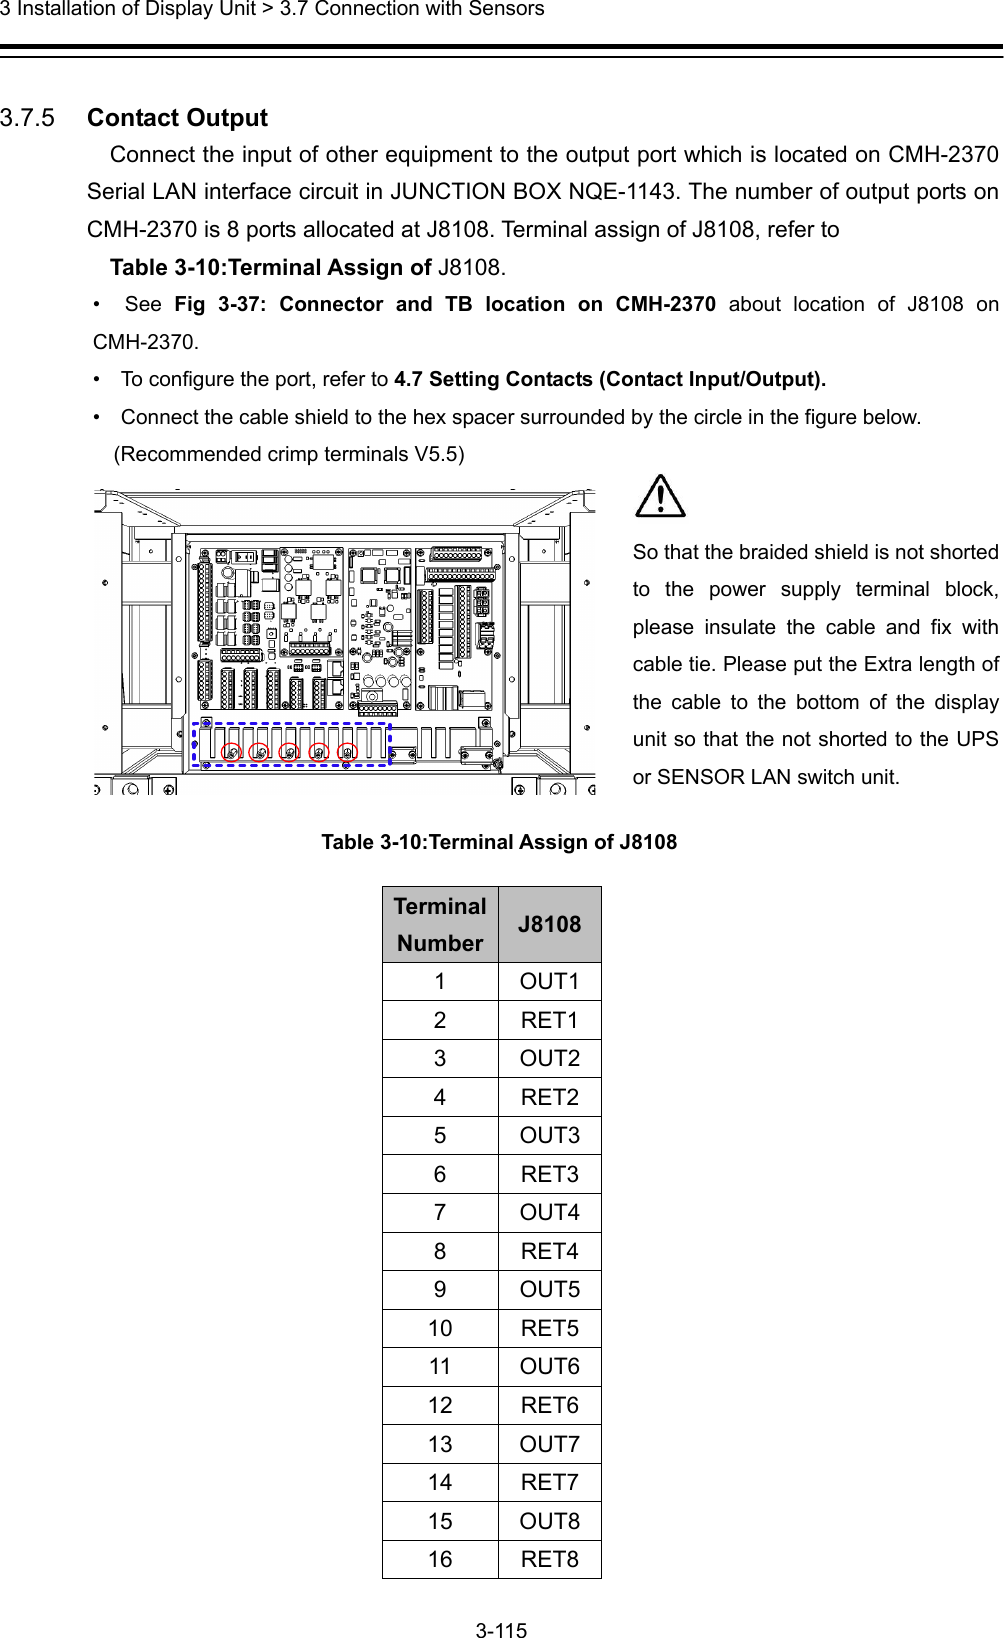  3 Installation of Display Unit &gt; 3.7 Connection with Sensors 3-115   3.7.5   Contact Output Connect the input of other equipment to the output port which is located on CMH-2370 Serial LAN interface circuit in JUNCTION BOX NQE-1143. The number of output ports on CMH-2370 is 8 ports allocated at J8108. Terminal assign of J8108, refer to   Table 3-10:Terminal Assign of J8108. •  See Fig 3-37: Connector and TB location on CMH-2370 about location of J8108 on CMH-2370.  •    To configure the port, refer to 4.7 Setting Contacts (Contact Input/Output). •    Connect the cable shield to the hex spacer surrounded by the circle in the figure below.   (Recommended crimp terminals V5.5)  Table 3-10:Terminal Assign of J8108 TerminalNumber J8108 1 OUT1 2 RET1 3 OUT2 4 RET2 5 OUT3 6 RET3 7 OUT4 8 RET4 9 OUT5 10 RET5 11 OUT6 12 RET6 13 OUT7 14 RET7 15 OUT8 16 RET8   So that the braided shield is not shorted to the power supply terminal block, please insulate the cable and fix with cable tie. Please put the Extra length of the cable to the bottom of the display unit so that the not shorted to the UPS or SENSOR LAN switch unit. 